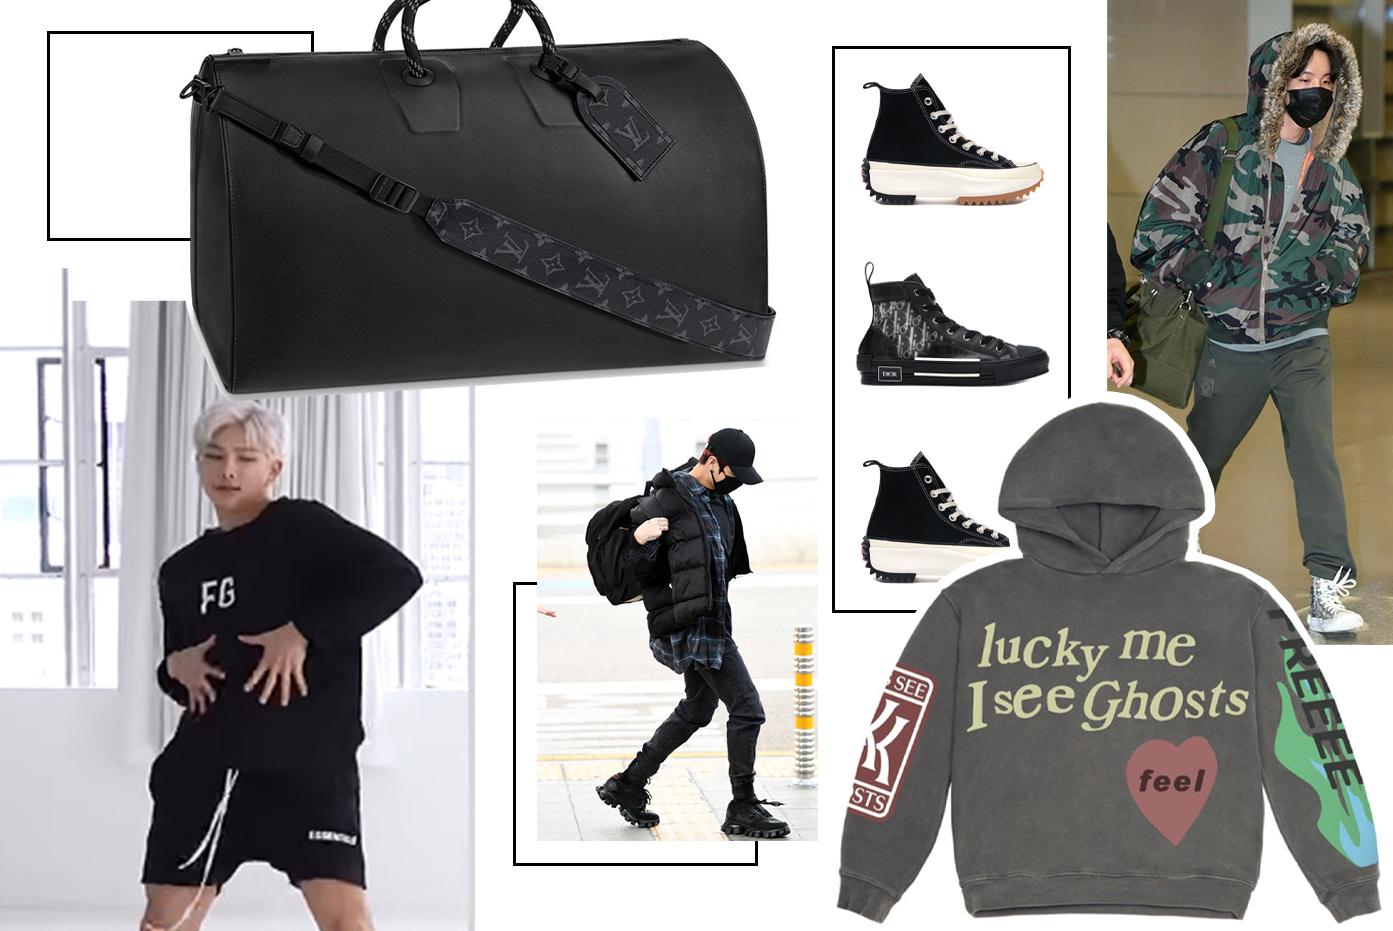 Fashion Alert! BTS Jungkook Can Turn Any Simple Outfit Into A